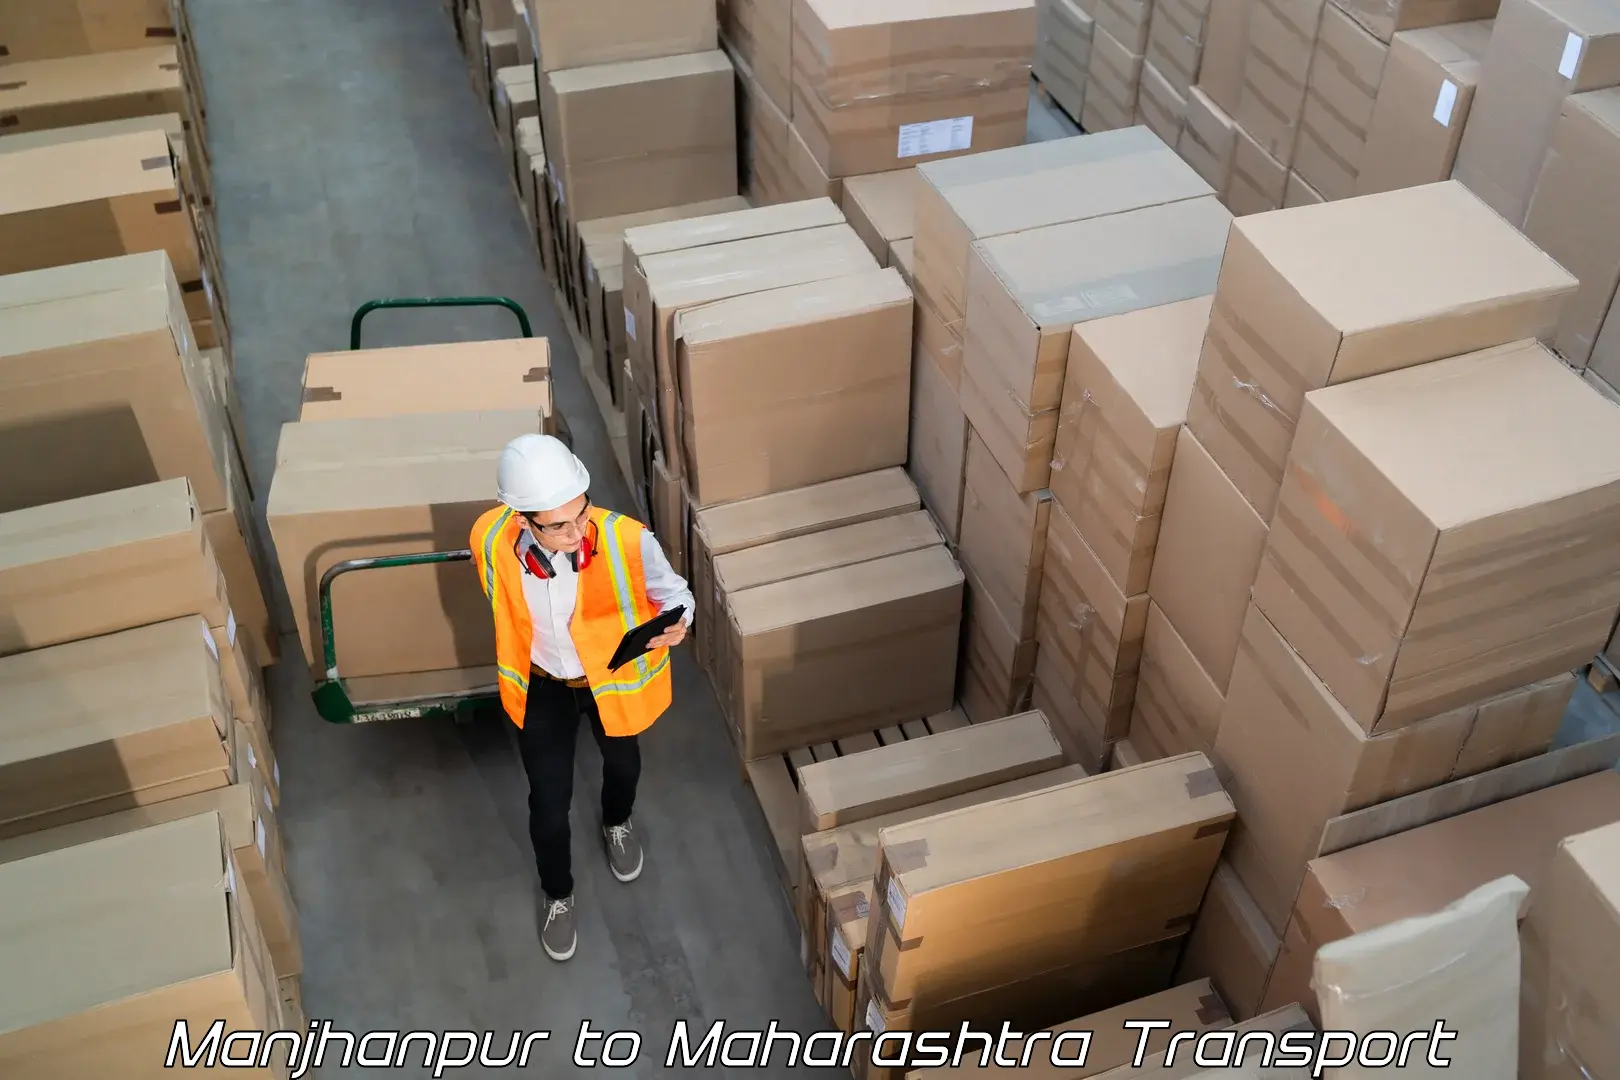 Air freight transport services Manjhanpur to Ambarnath